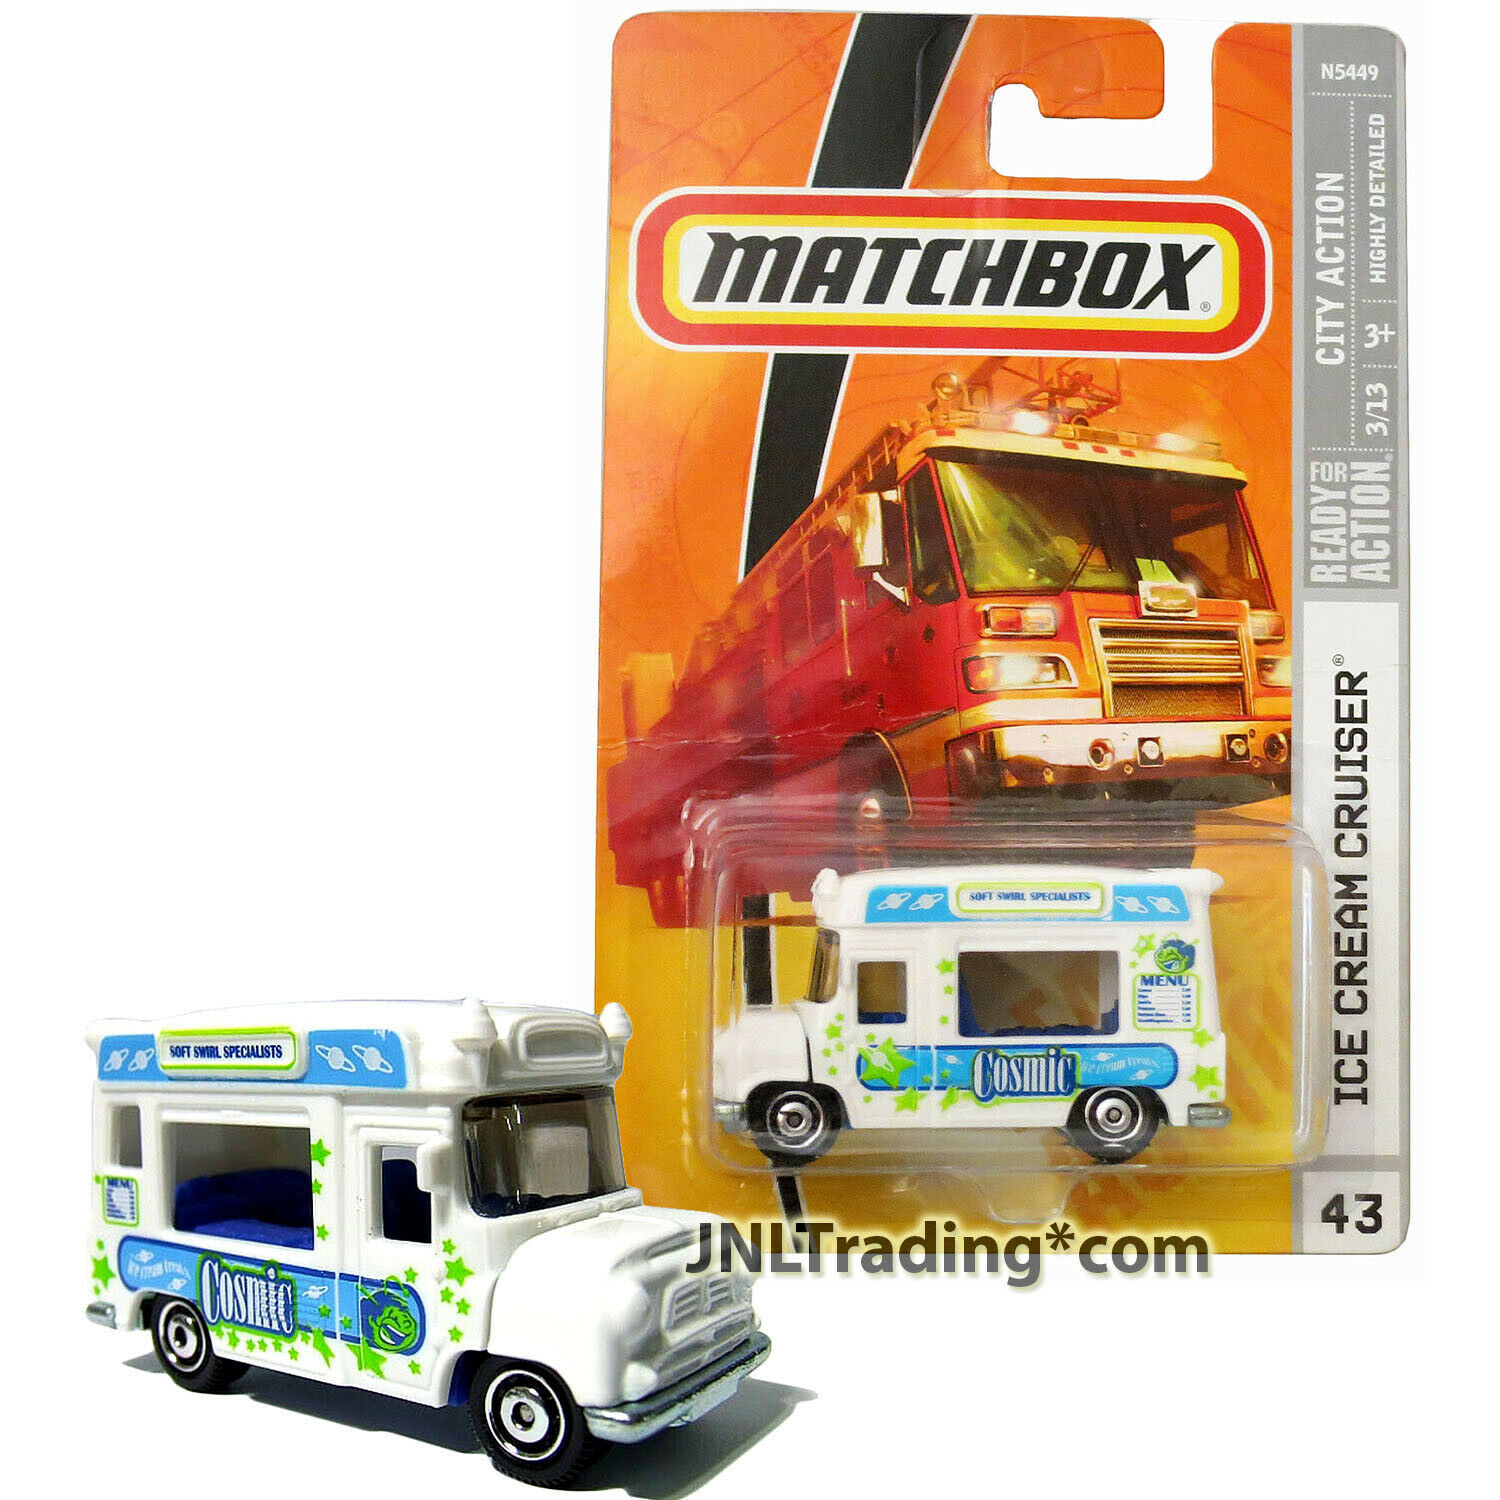 Primary image for Year 2008 Matchbox City Action 1:64 Die Cast Car #43 - White ICE CREAM CRUISER